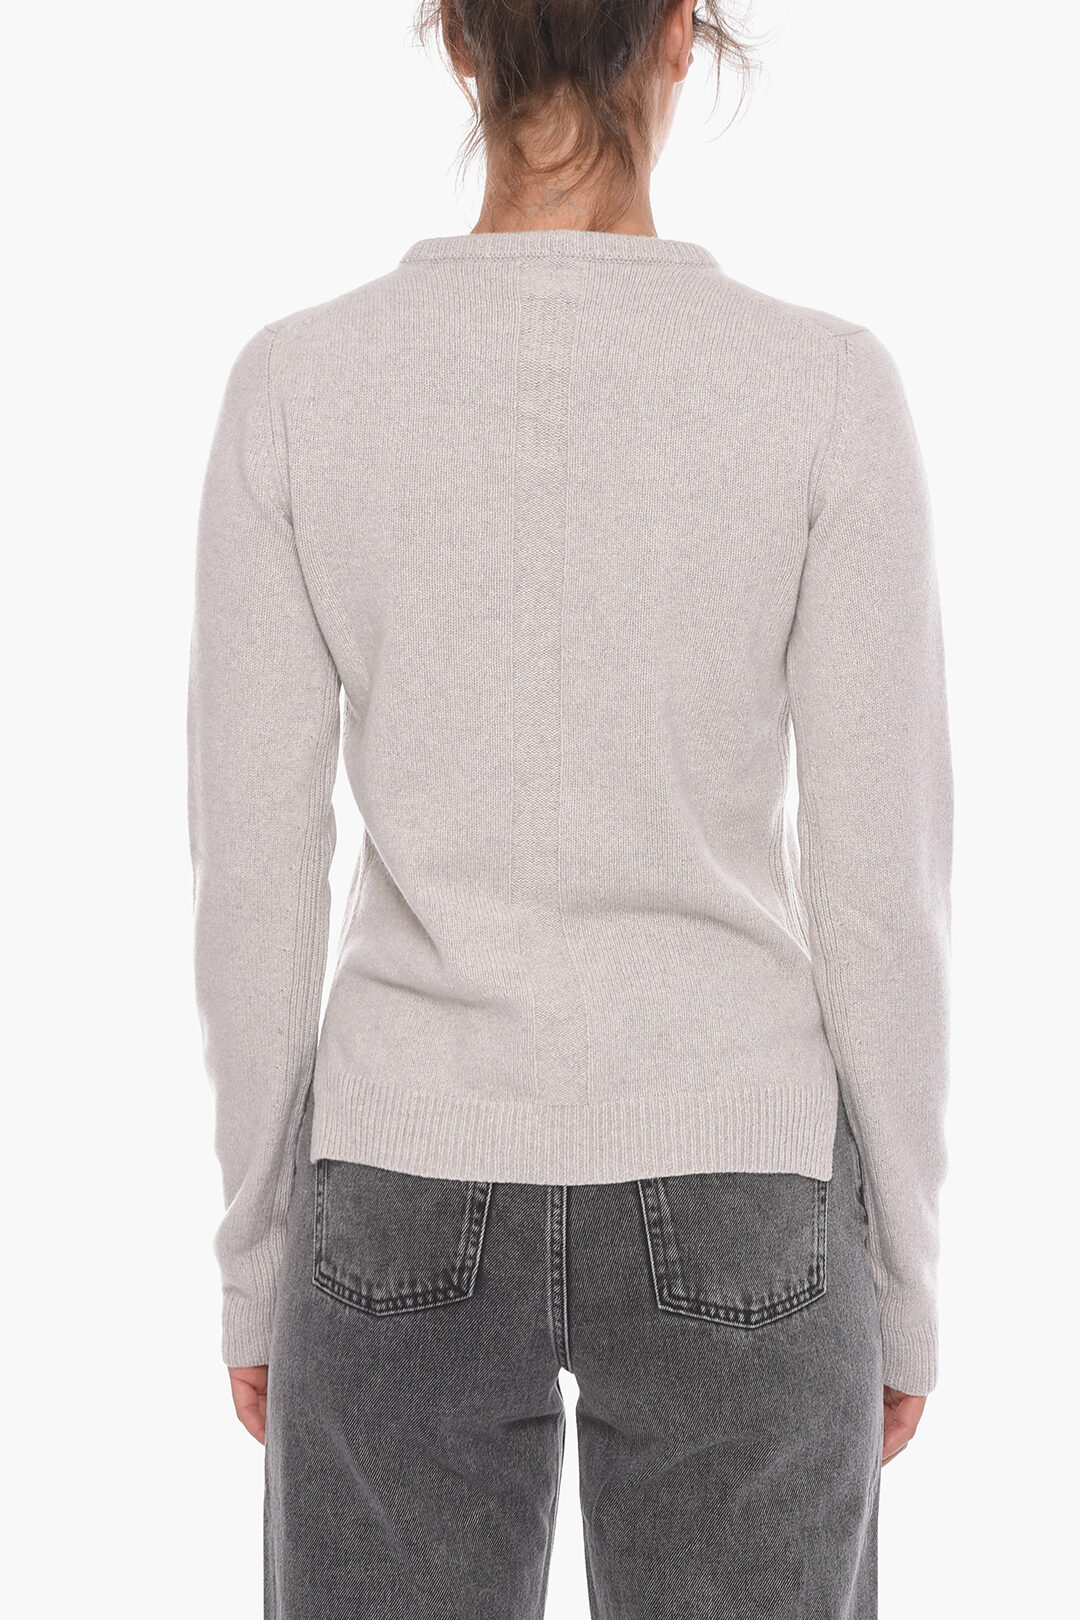 Woolrich Cashmere and Wool Blend Crewneck Sweater Women Grey Size Xs